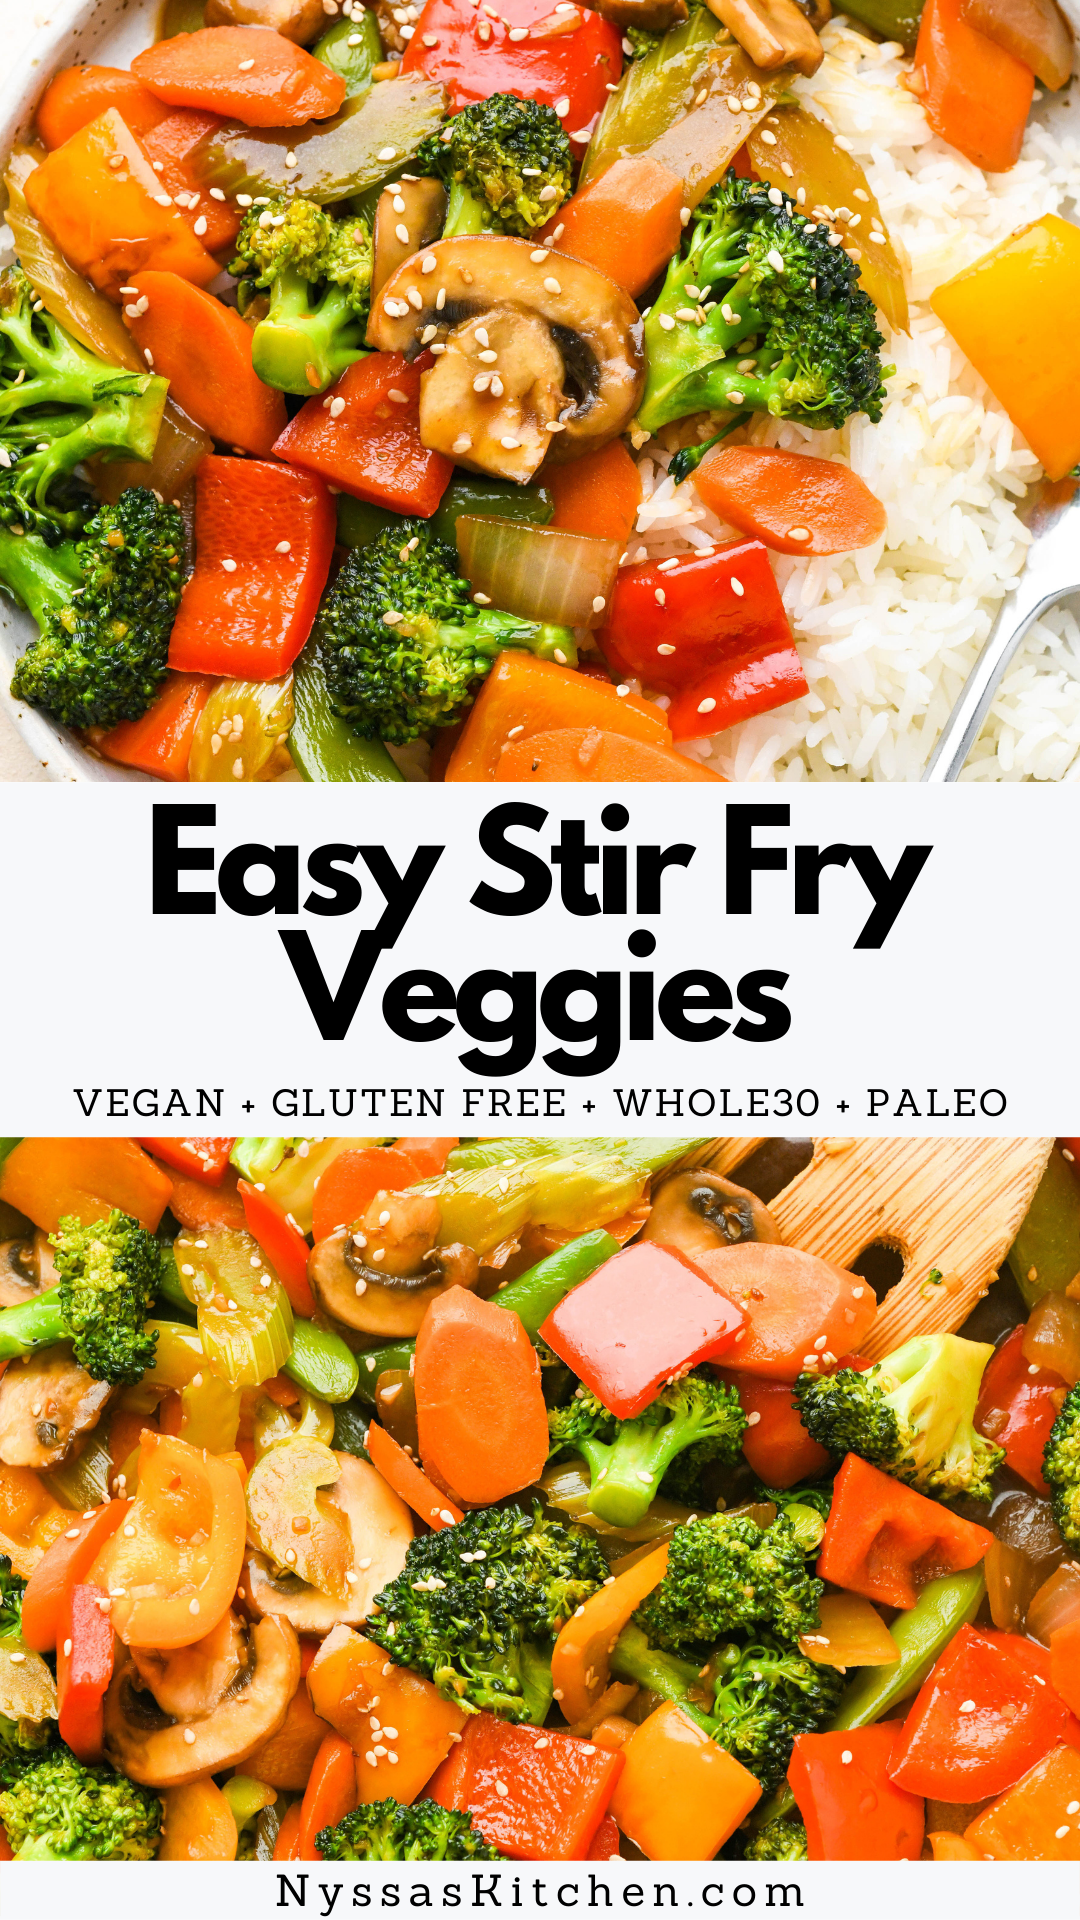 This recipe for easy stir fry veggies is packed with flavor and ALL the healthy vegetables. Made with a homemade stir fry sauce that is soy free, and ready in less than 30 minutes. The perfect simple recipe for busy weeknights or meal prep! Gluten Free, vegan, vegetarian, Whole30, and paleo.